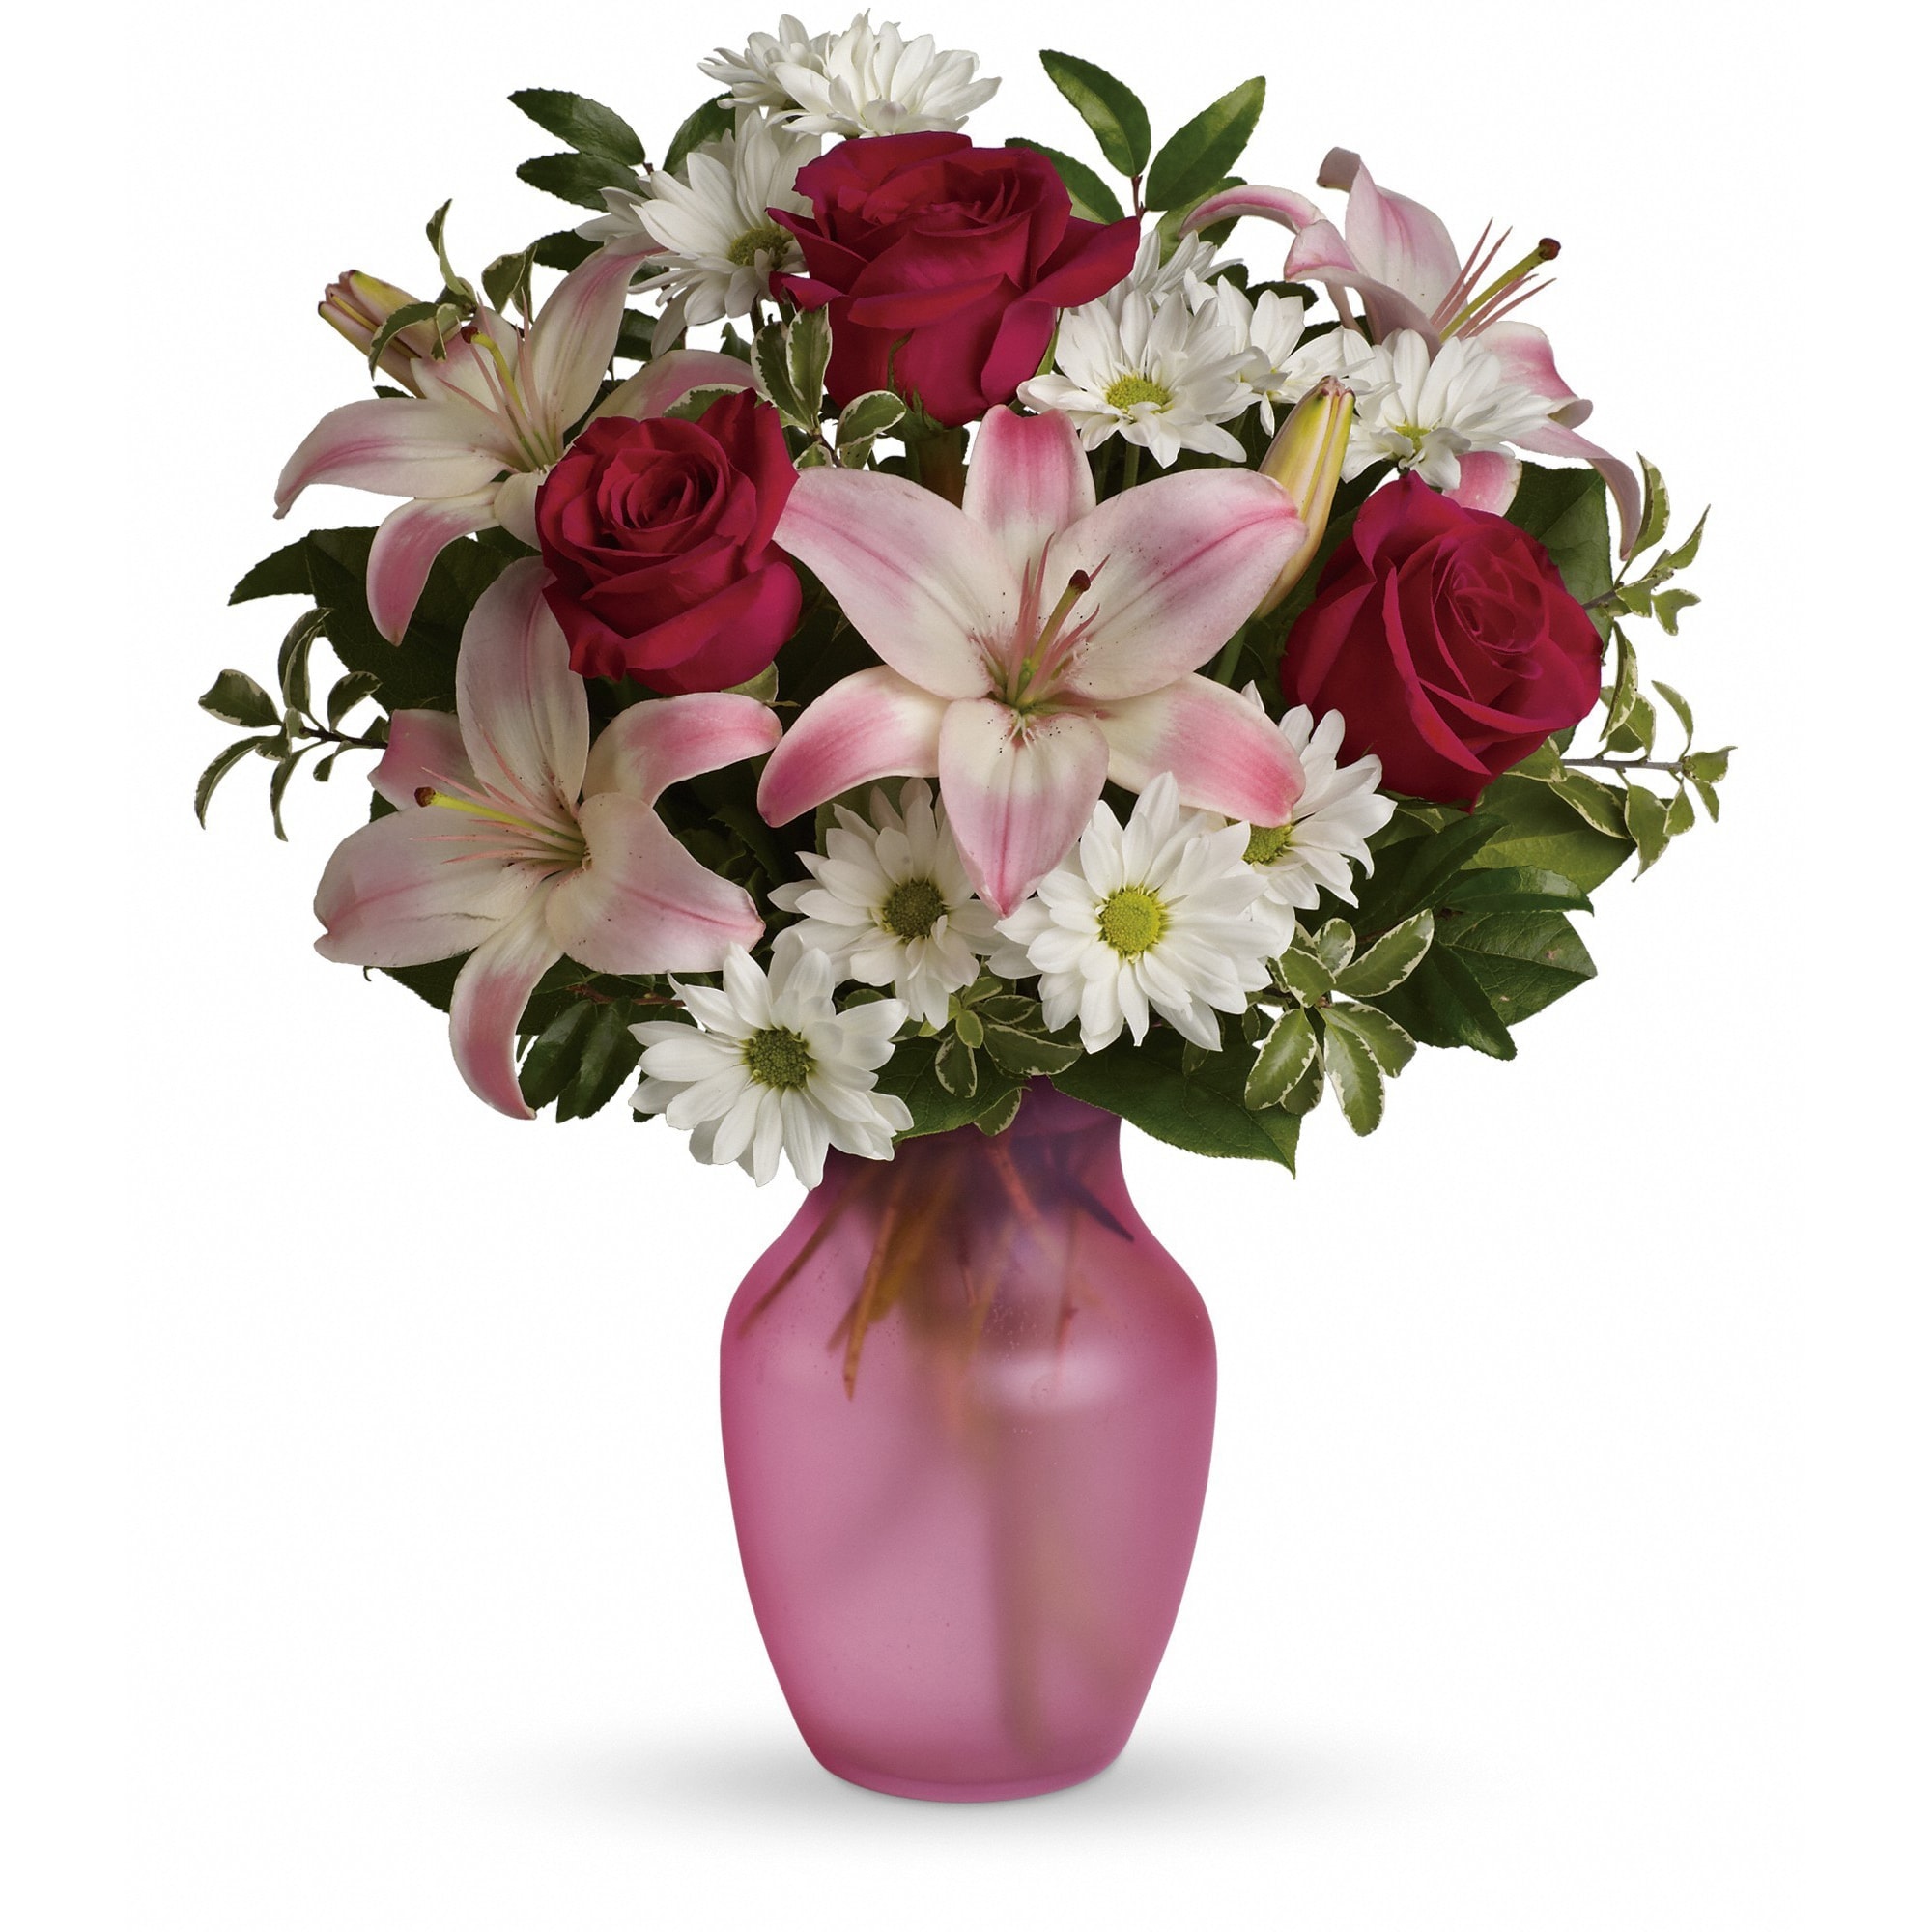 She's the One Bouquet by Teleflora - Your one and only love deserves an equally singular bouquet. Pamper her with this romantic mix of blooms presented in a beautiful matte rose colored glass vase. 